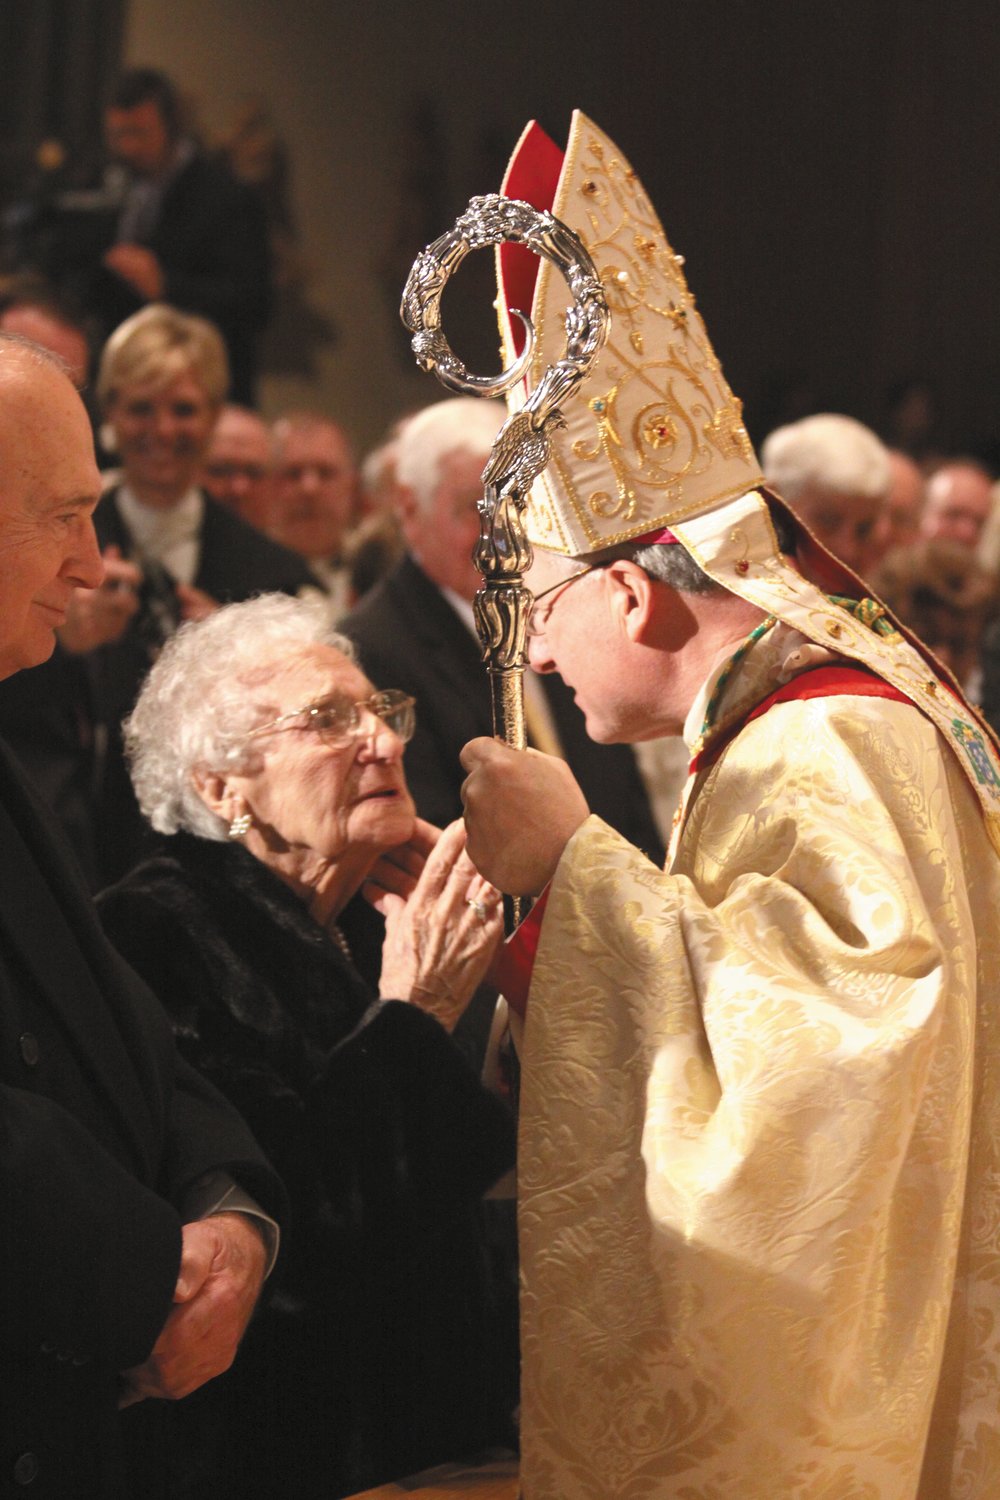 Bishop Evans receives a kiss from his dear mother at his episcopal ordination on December 15, 2009, in the Cathedral of Saints Peter and Paul, Providence.